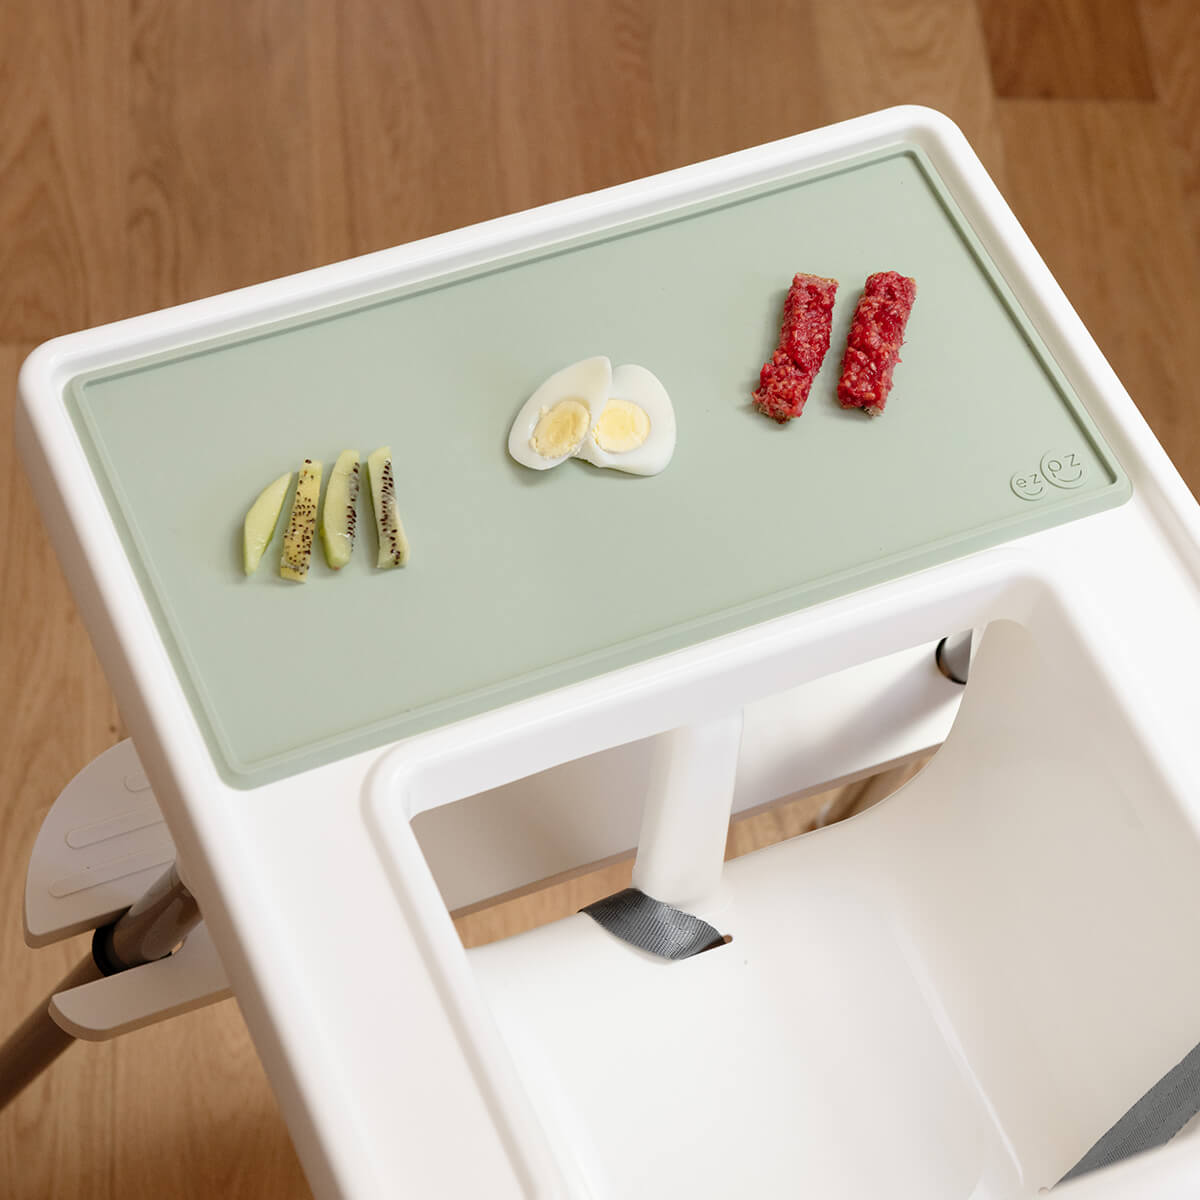 The Tiny Placemat in Sage is a non-slip, silicone placemat that fits on most highchair trays